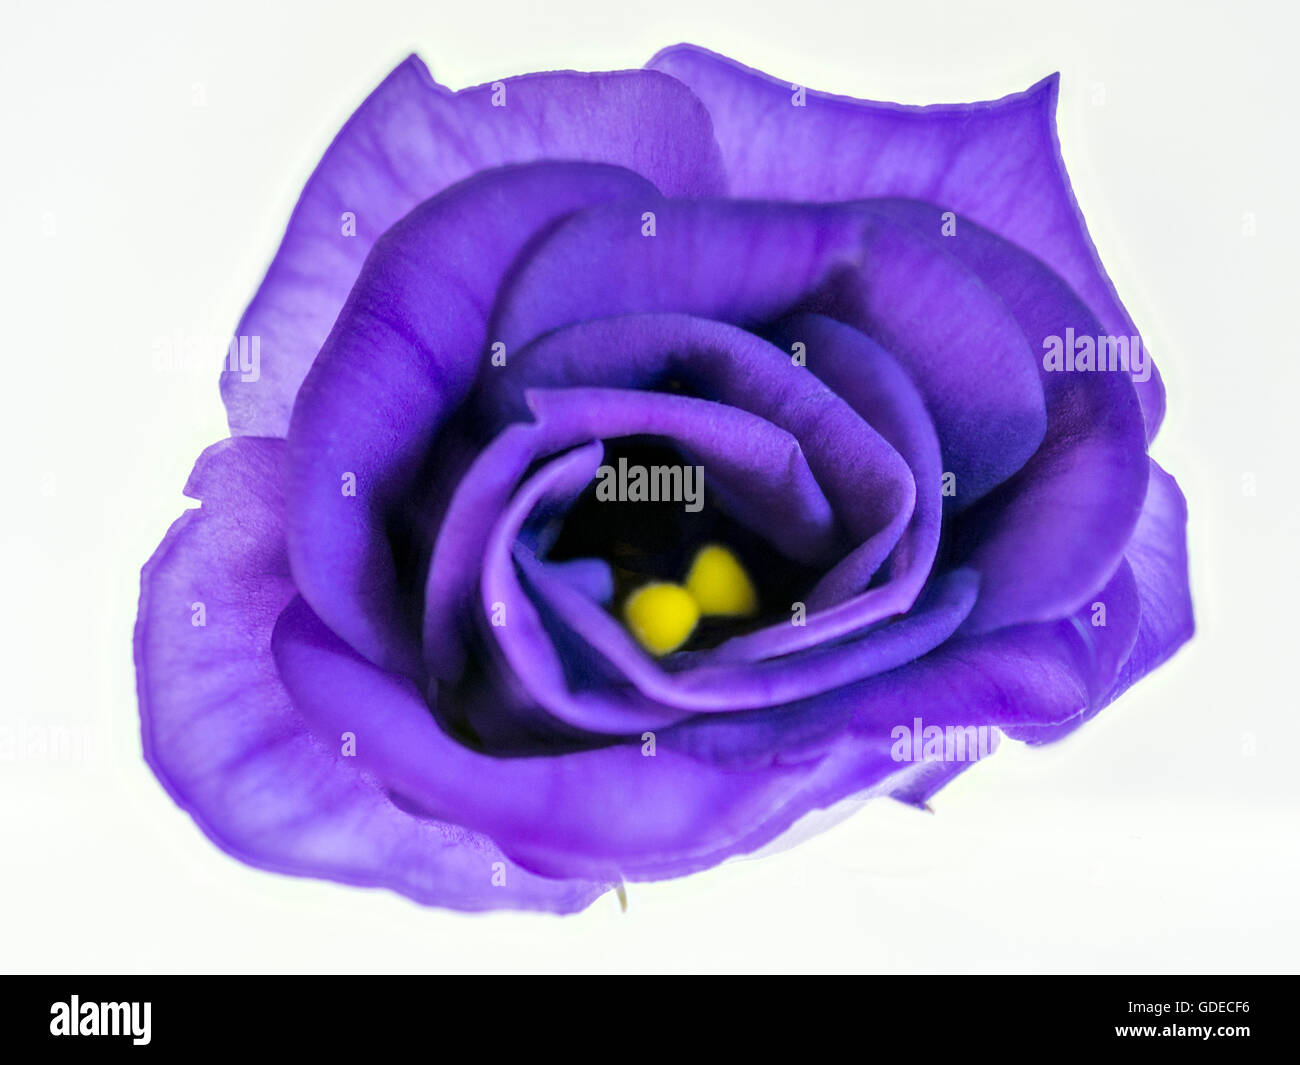 Blue Campanula. This blue campanula flower has been isolated and back lit to show its beauty and delicate petal structure. Stock Photo